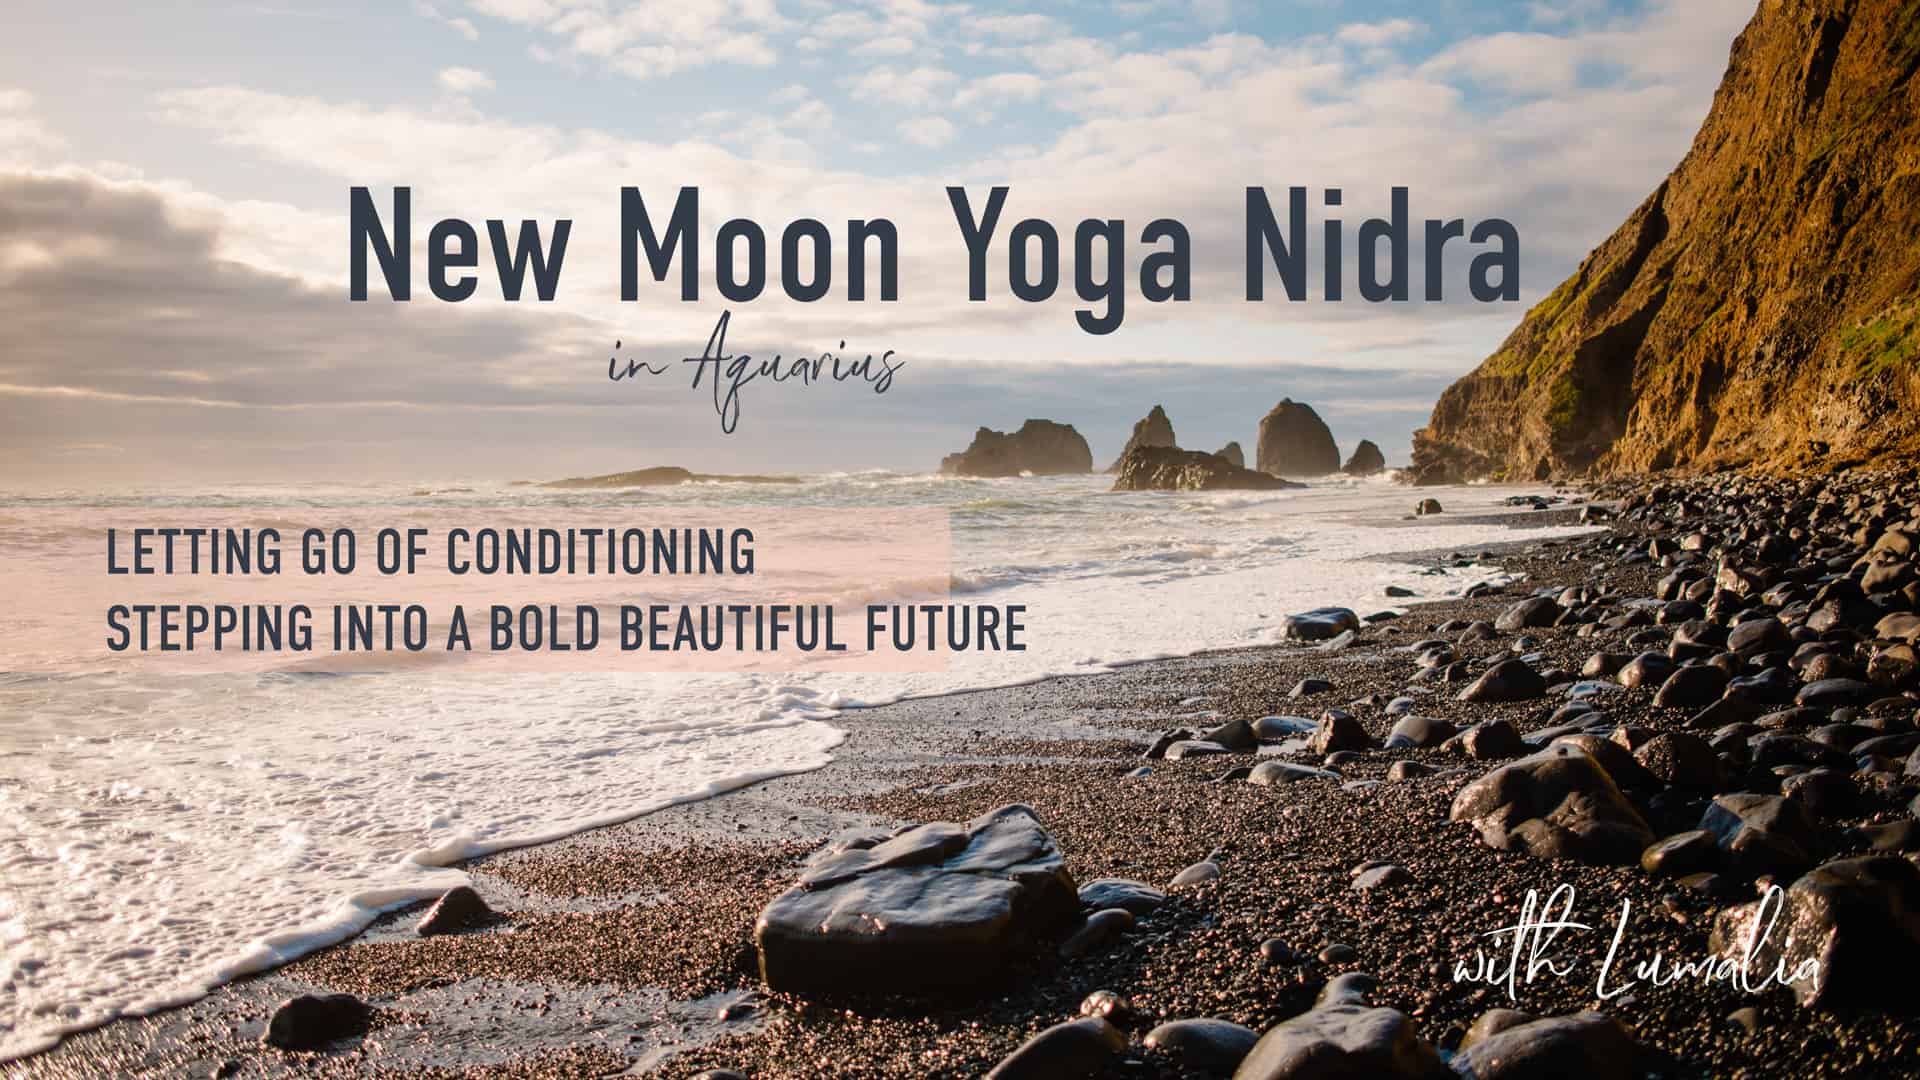 "New moon yoga nidra in aquarius Letting go of conditioning stepping into a Bold Beautiful future with Lumalia" on top of a photo of a beach with a cliff face and rocks